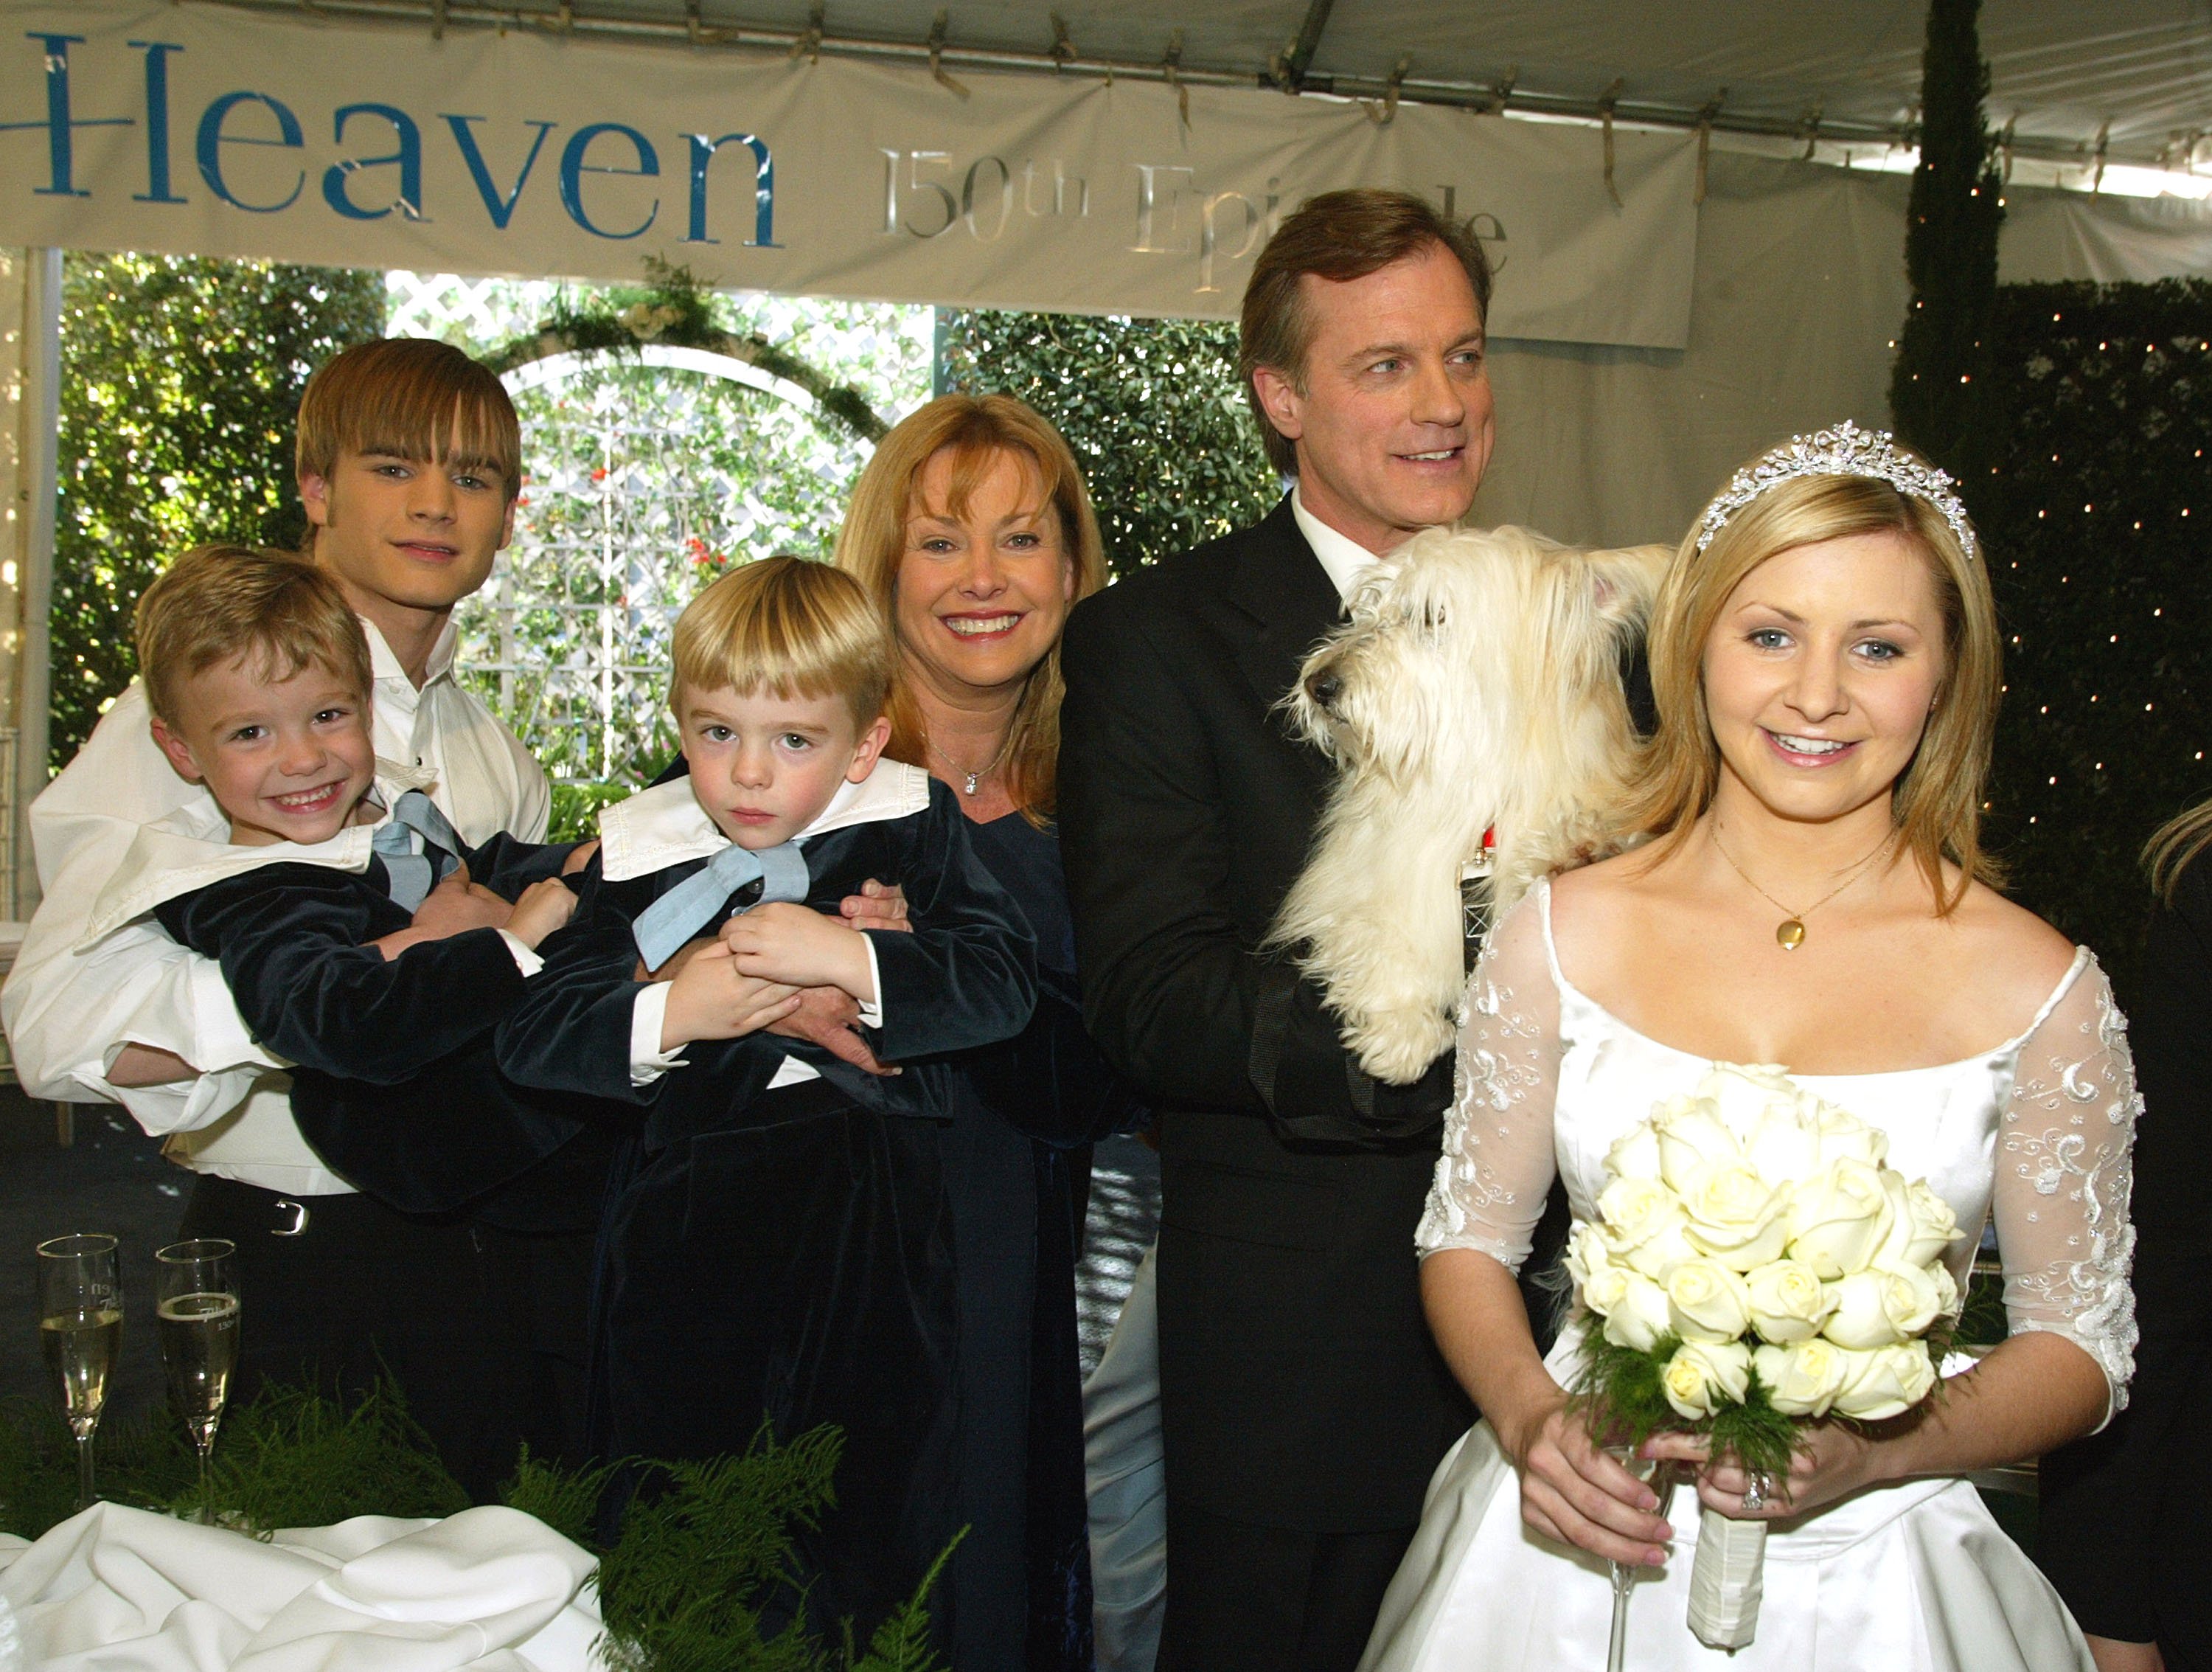 David Gallagher, twins Lorenzo and Nikolas Brino, Catherine Hicks, Stephen Collins and Beverley Mitchell posing at a reception to celebrate 150 episodes of "7th Heaven" in Los Angeles, California | Photo: Kevin Winter/Getty Images